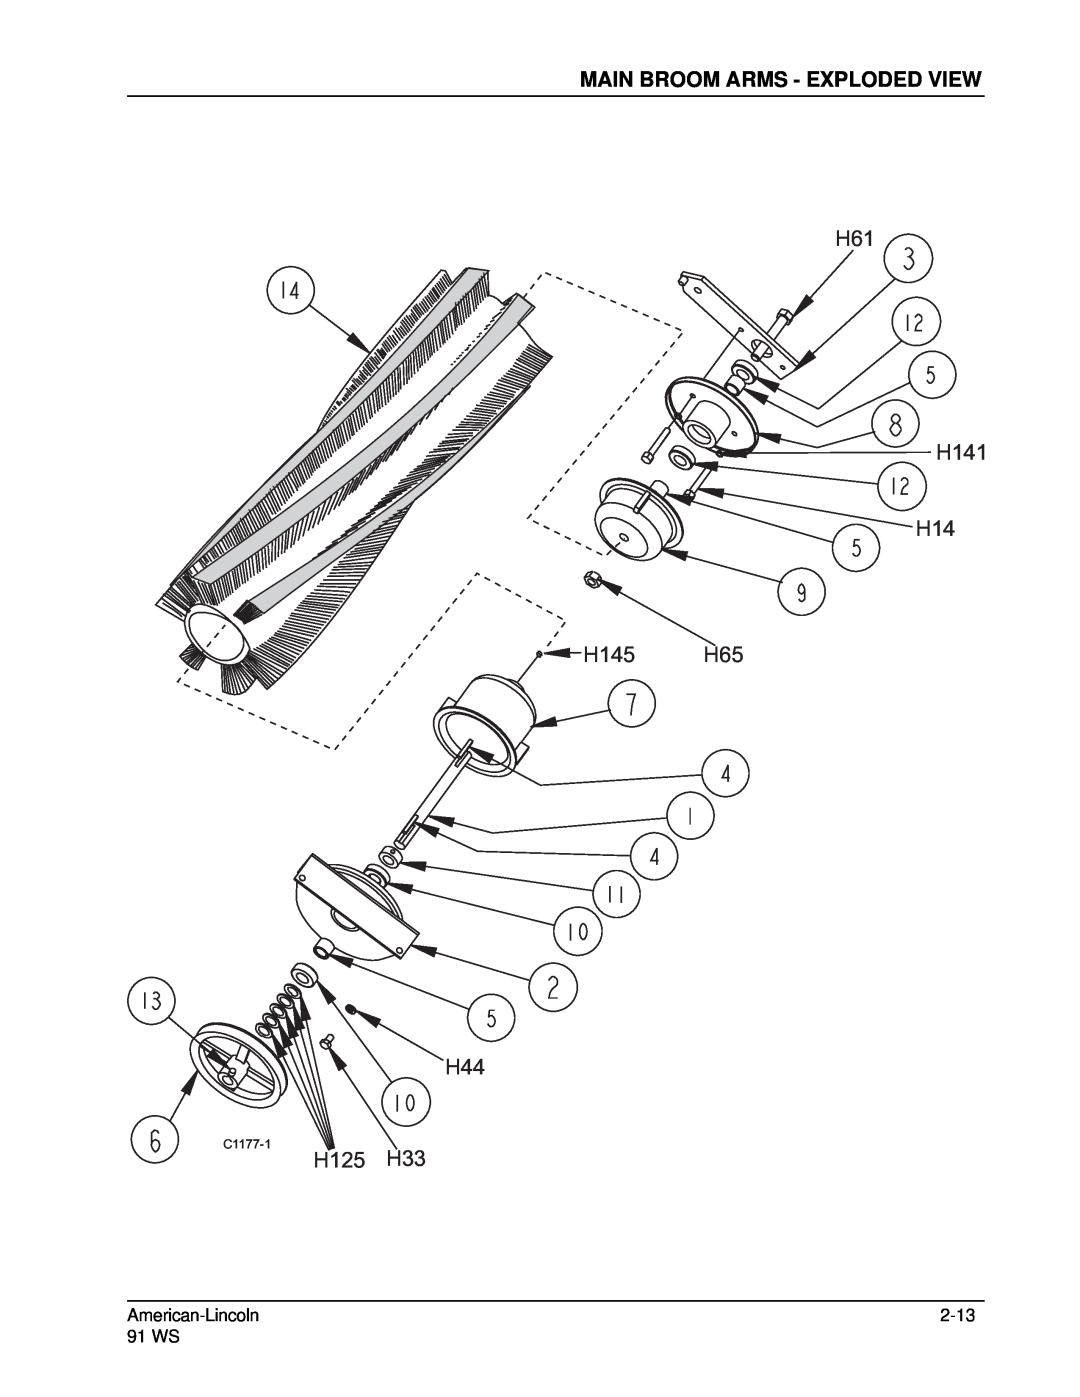 Nilfisk-ALTO 91WS manual Main Broom Arms - Exploded View, H61 H141 H14 H145 H65 H44, H125 H33 